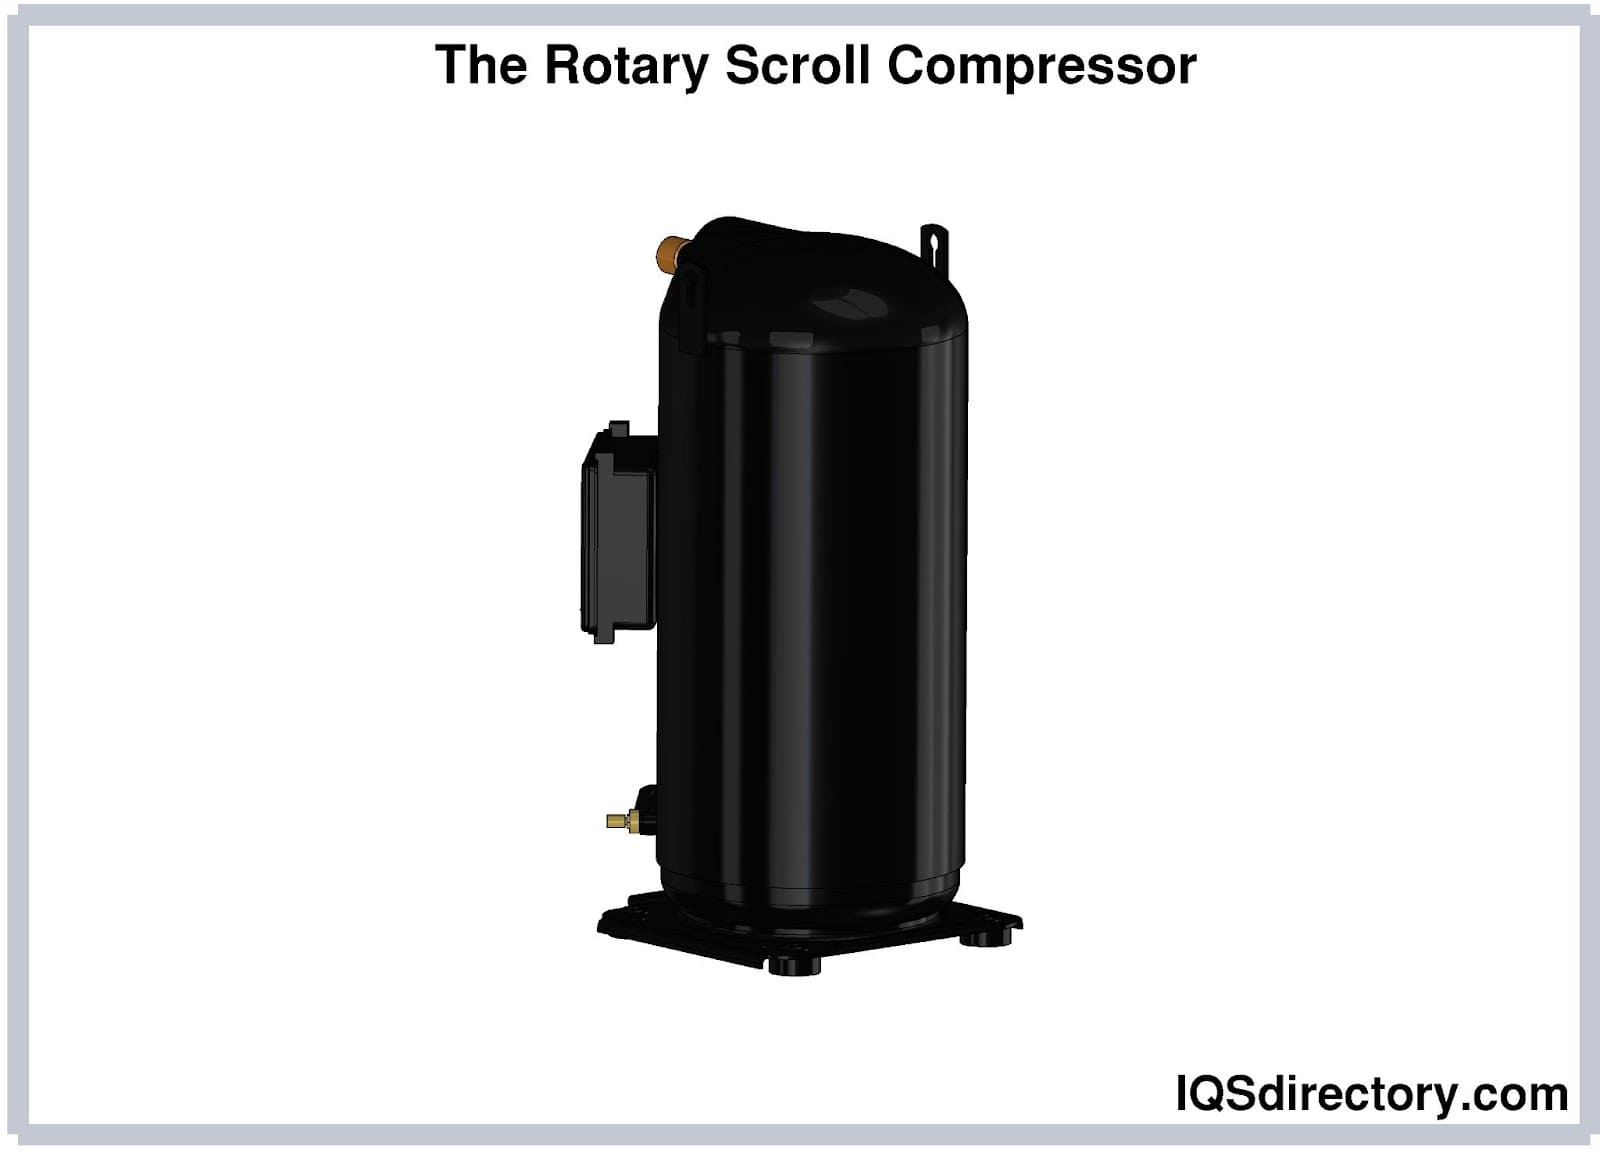 The Rotary Scroll Compressor